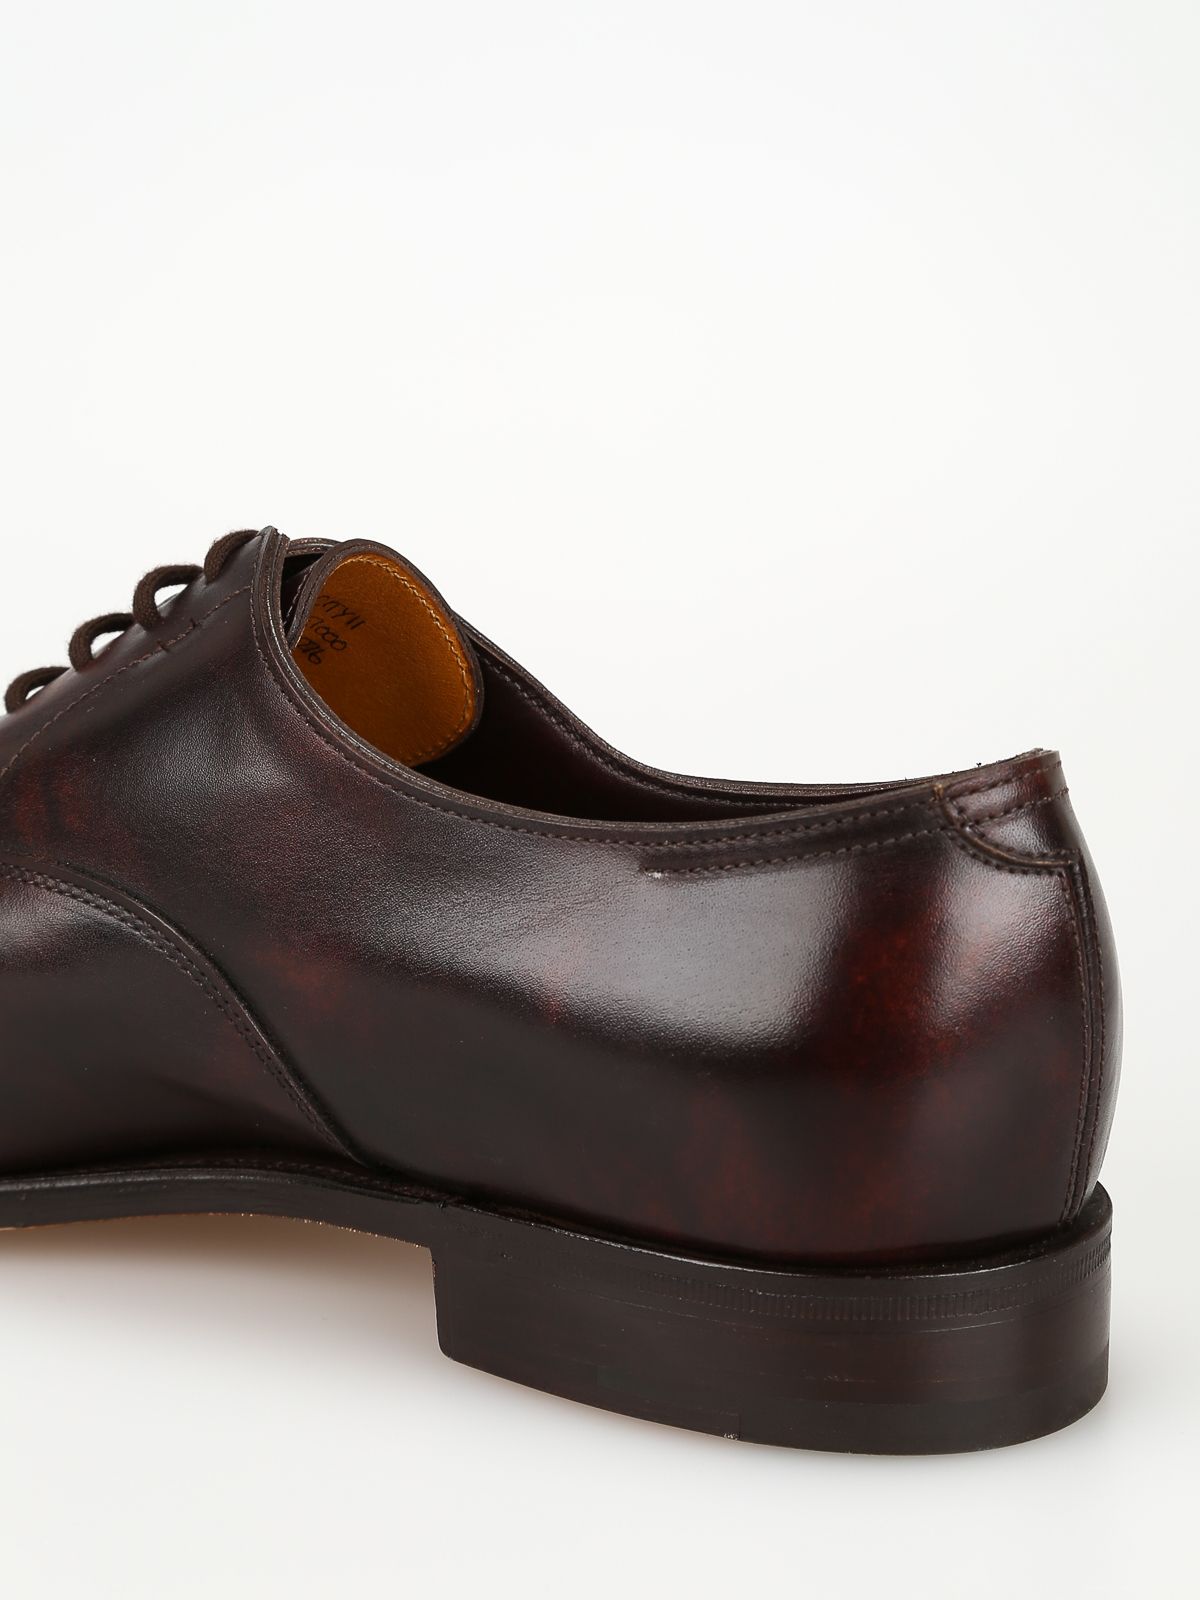 Classic shoes John Lobb - City II brown calf leather Oxford shoes